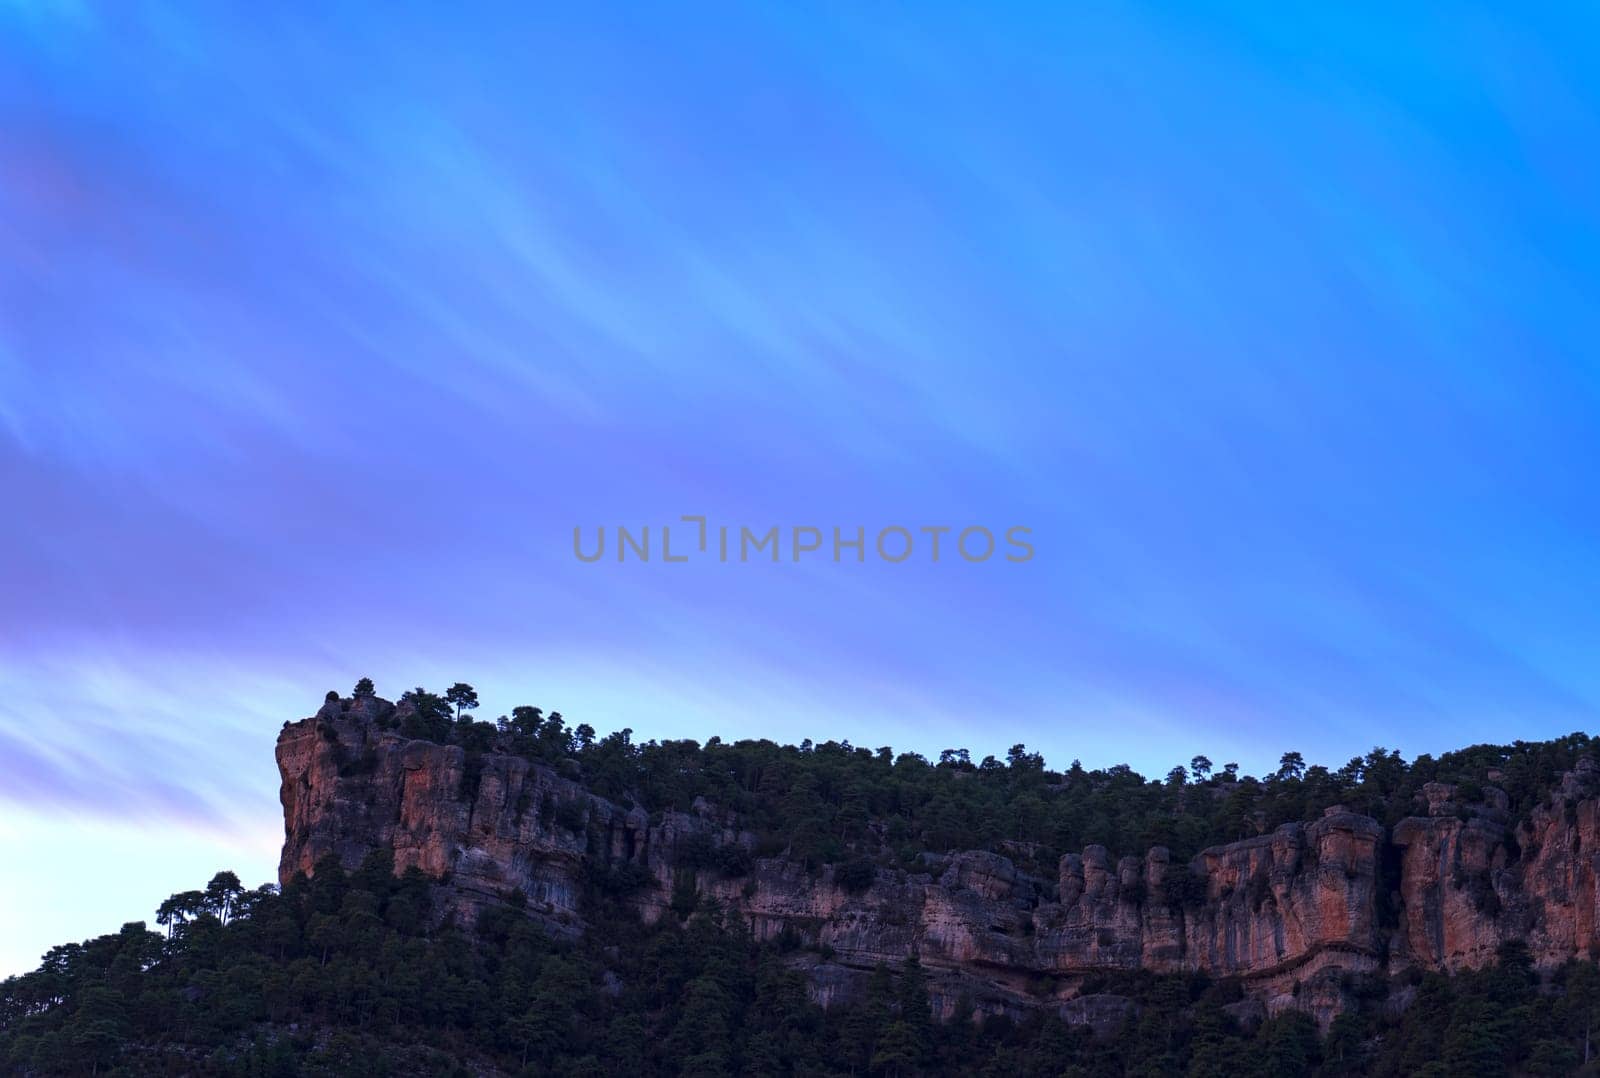 Tranquil landscape featuring a jagged cliff beneath a sky with striking blue and purple streaks.